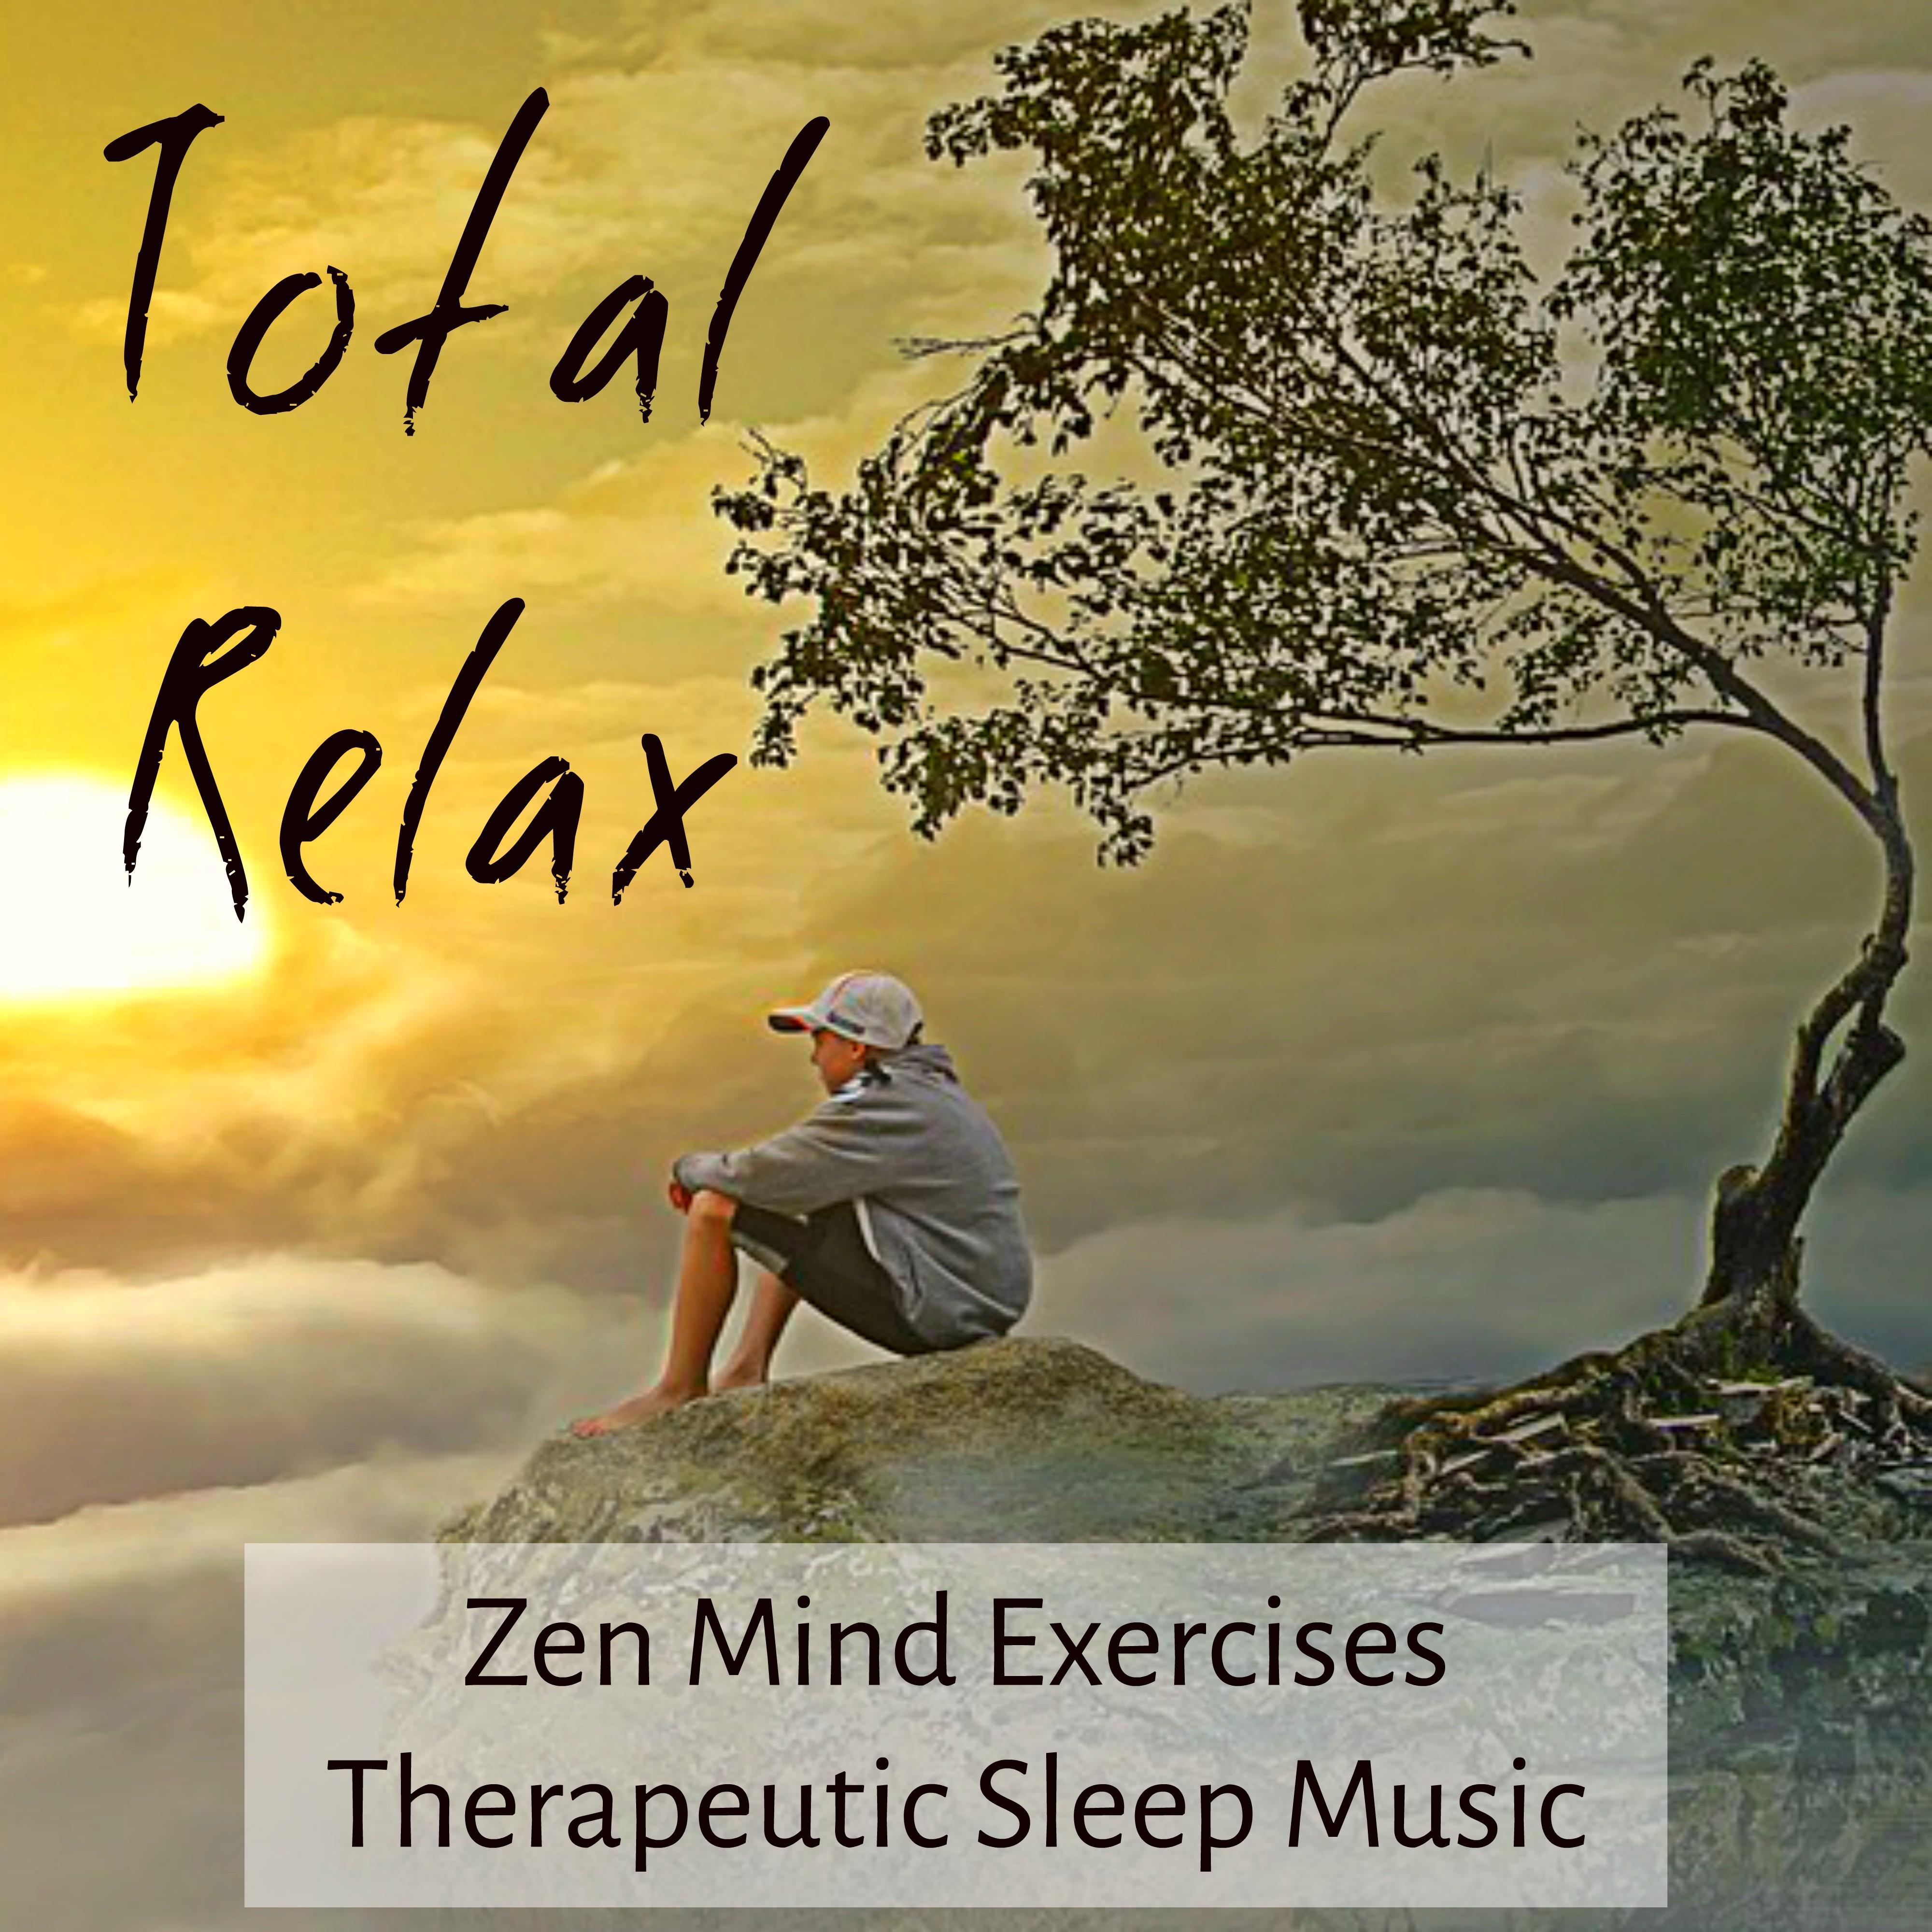 Total Relax - Zen Mind Exercises Therapeutic Sleep Music for Power Yoga Brainwave Generator Chakra Balancing with Instrumental New Age Nature Sounds